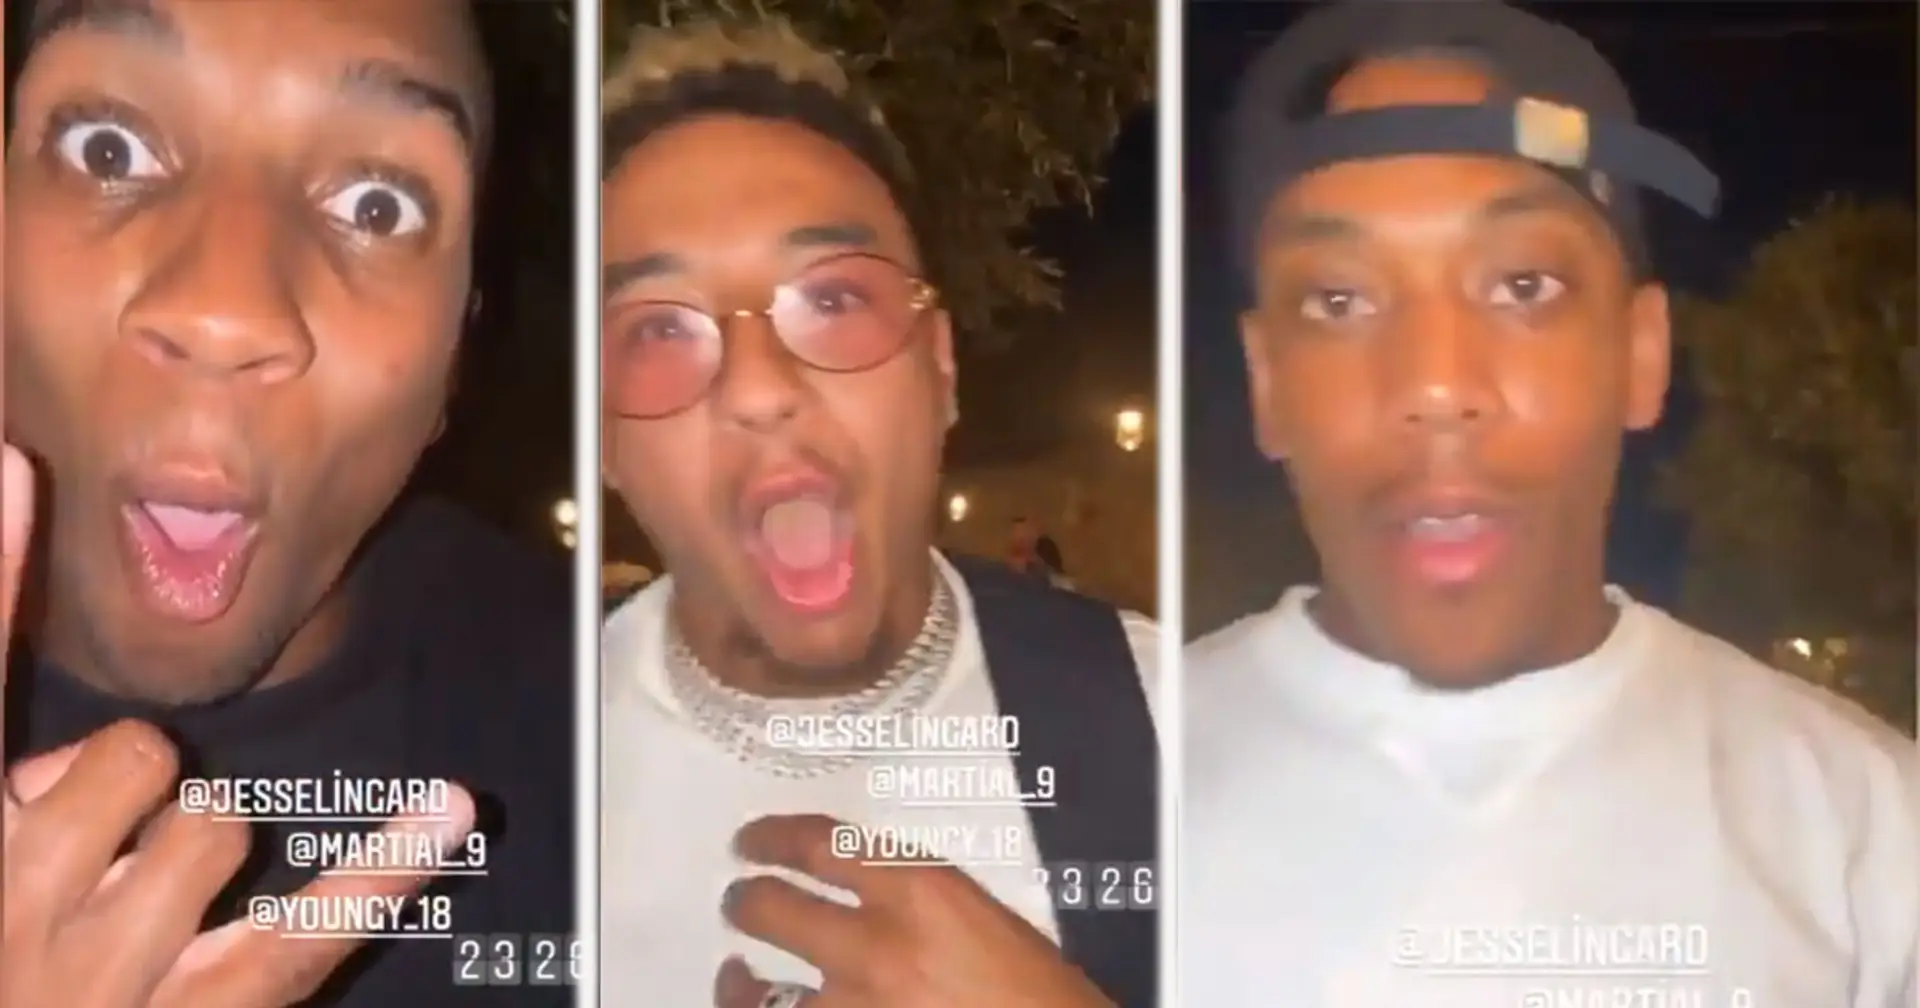 Lingard, Young and Martial reunite to party together in Mykonos